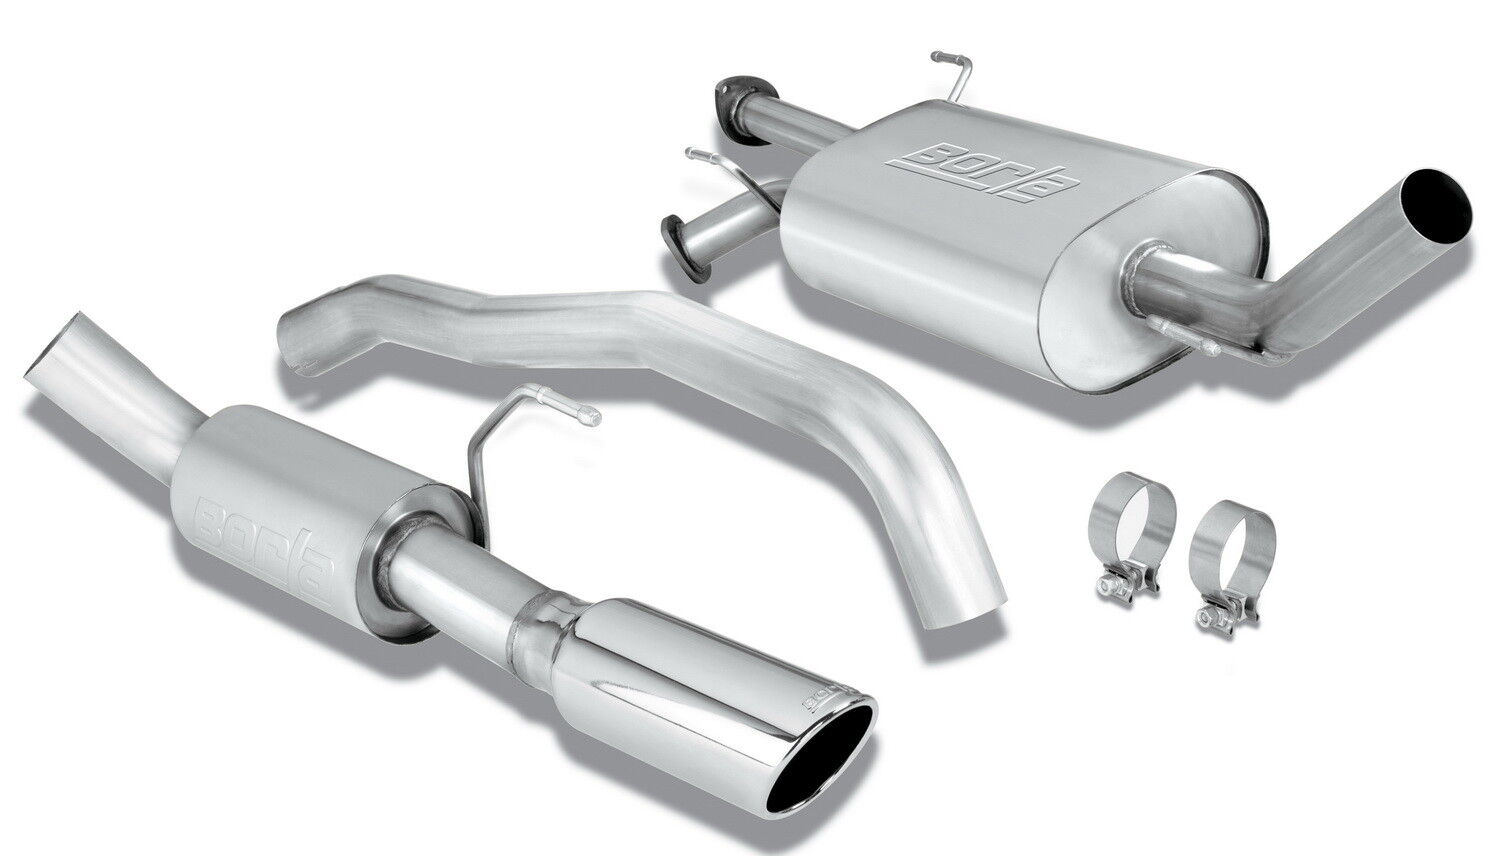 Borla 140277 Touring Cat-Back Exhaust System Fits 08-21 Sequoia